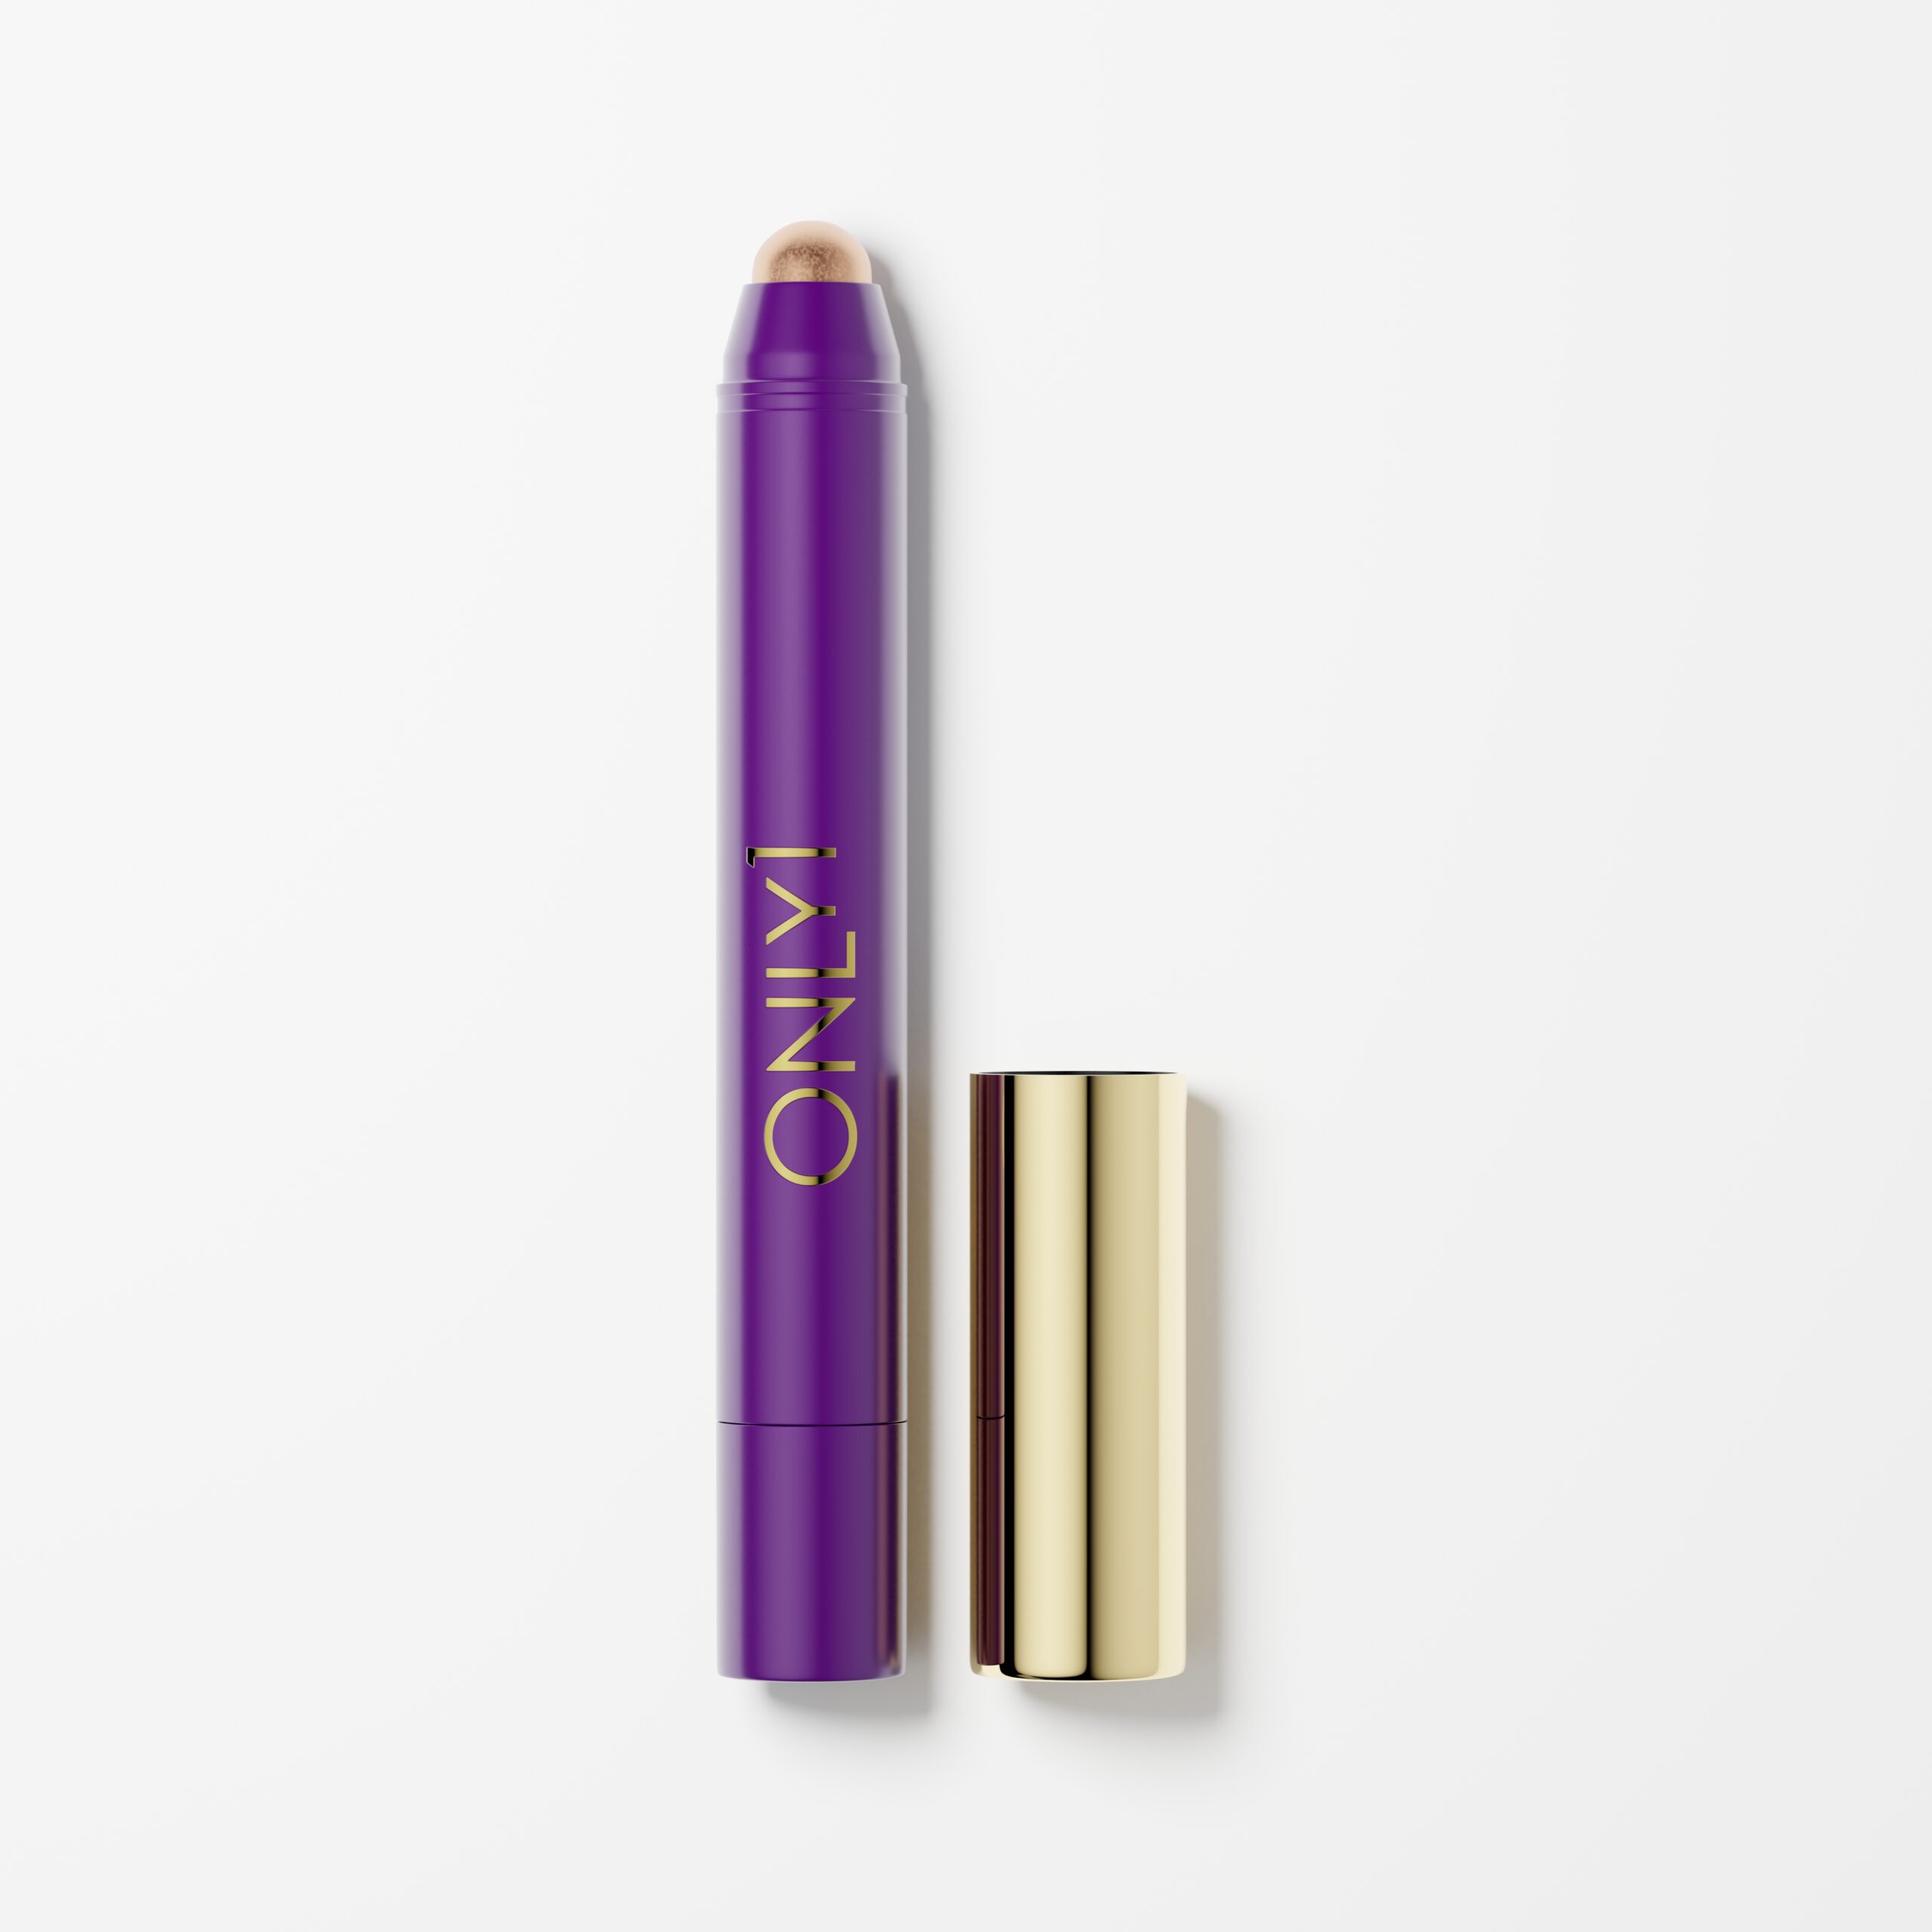 Eyeshadow stick in purple and gold packaging